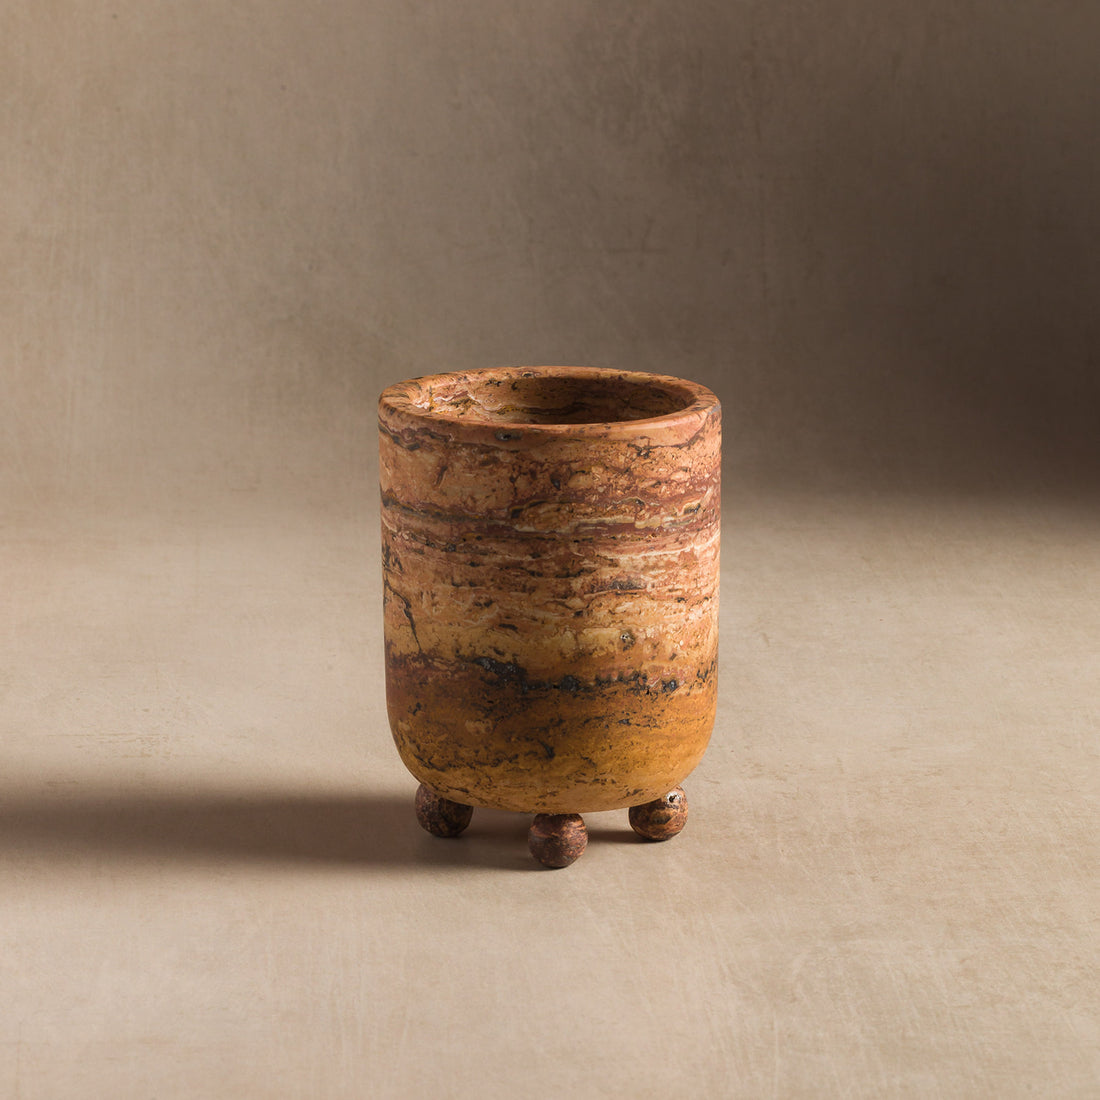 Small vessel made of rust travertine for home decor